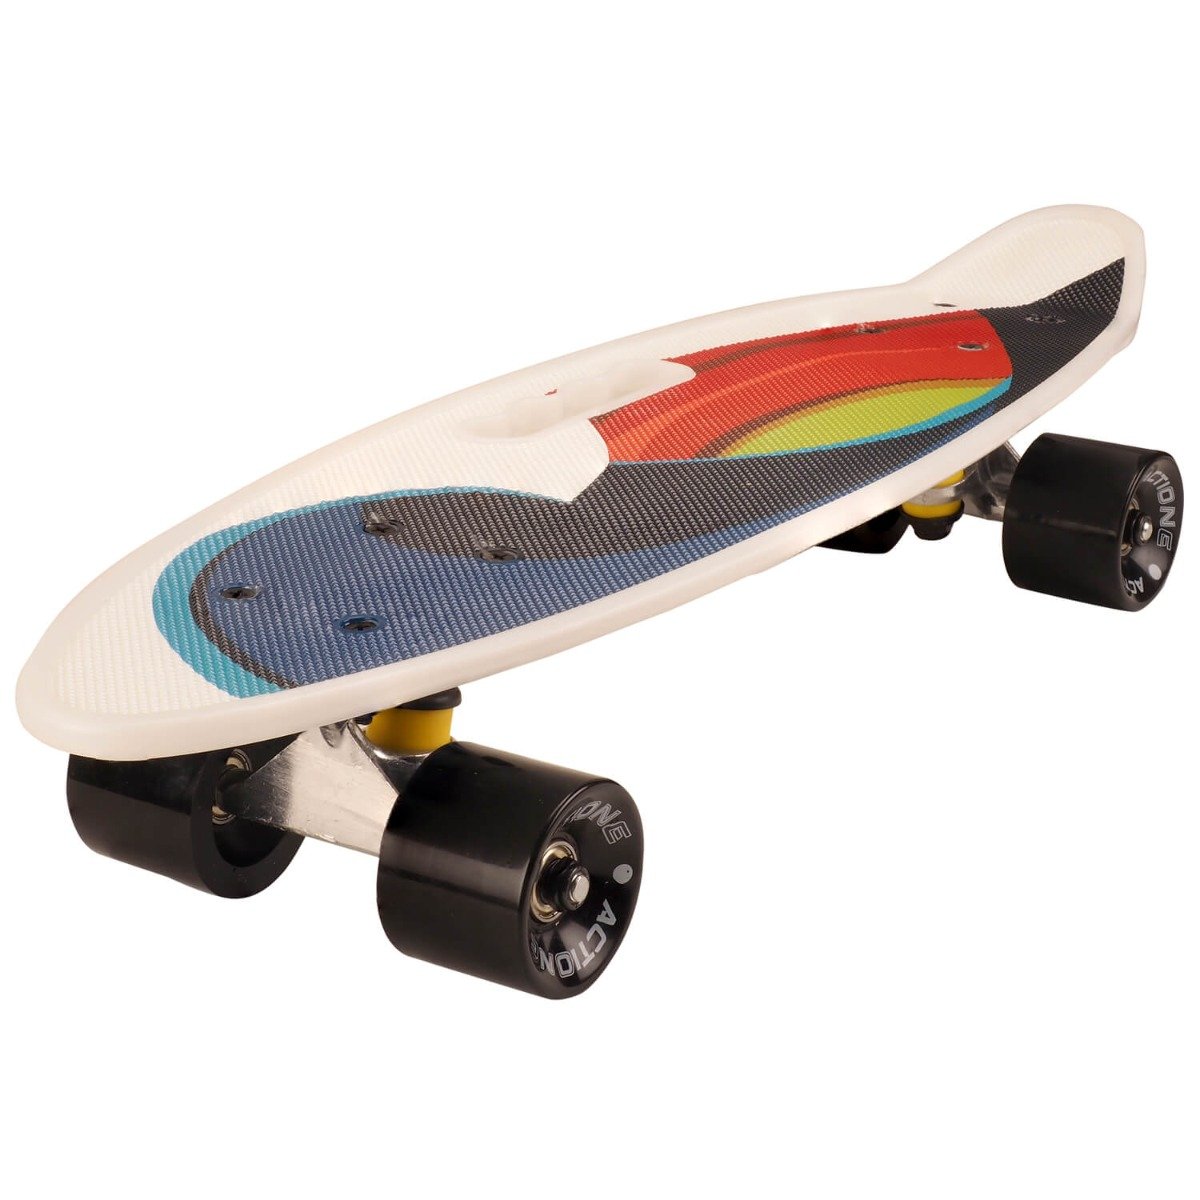 Penny board portabil Action One, ABEC-7, Color Wave Action One imagine 2022